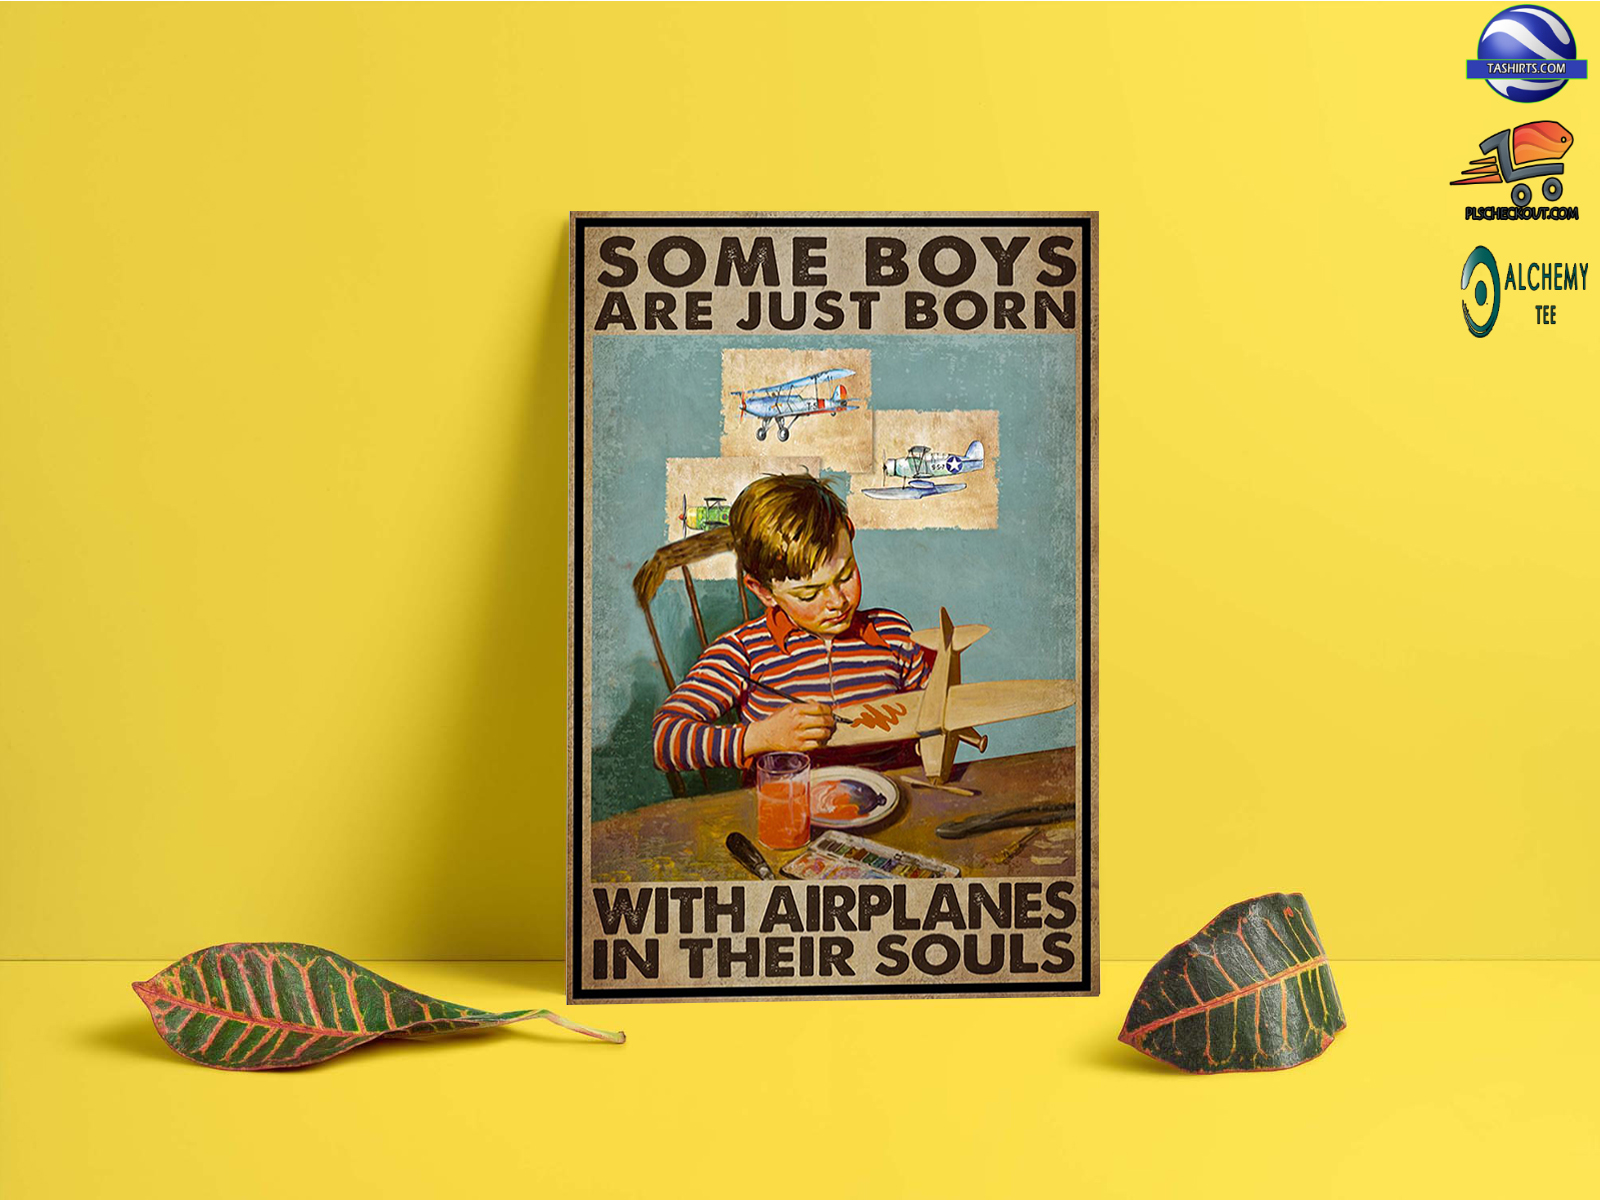 Some boys are just born with airplanes in their souls poster